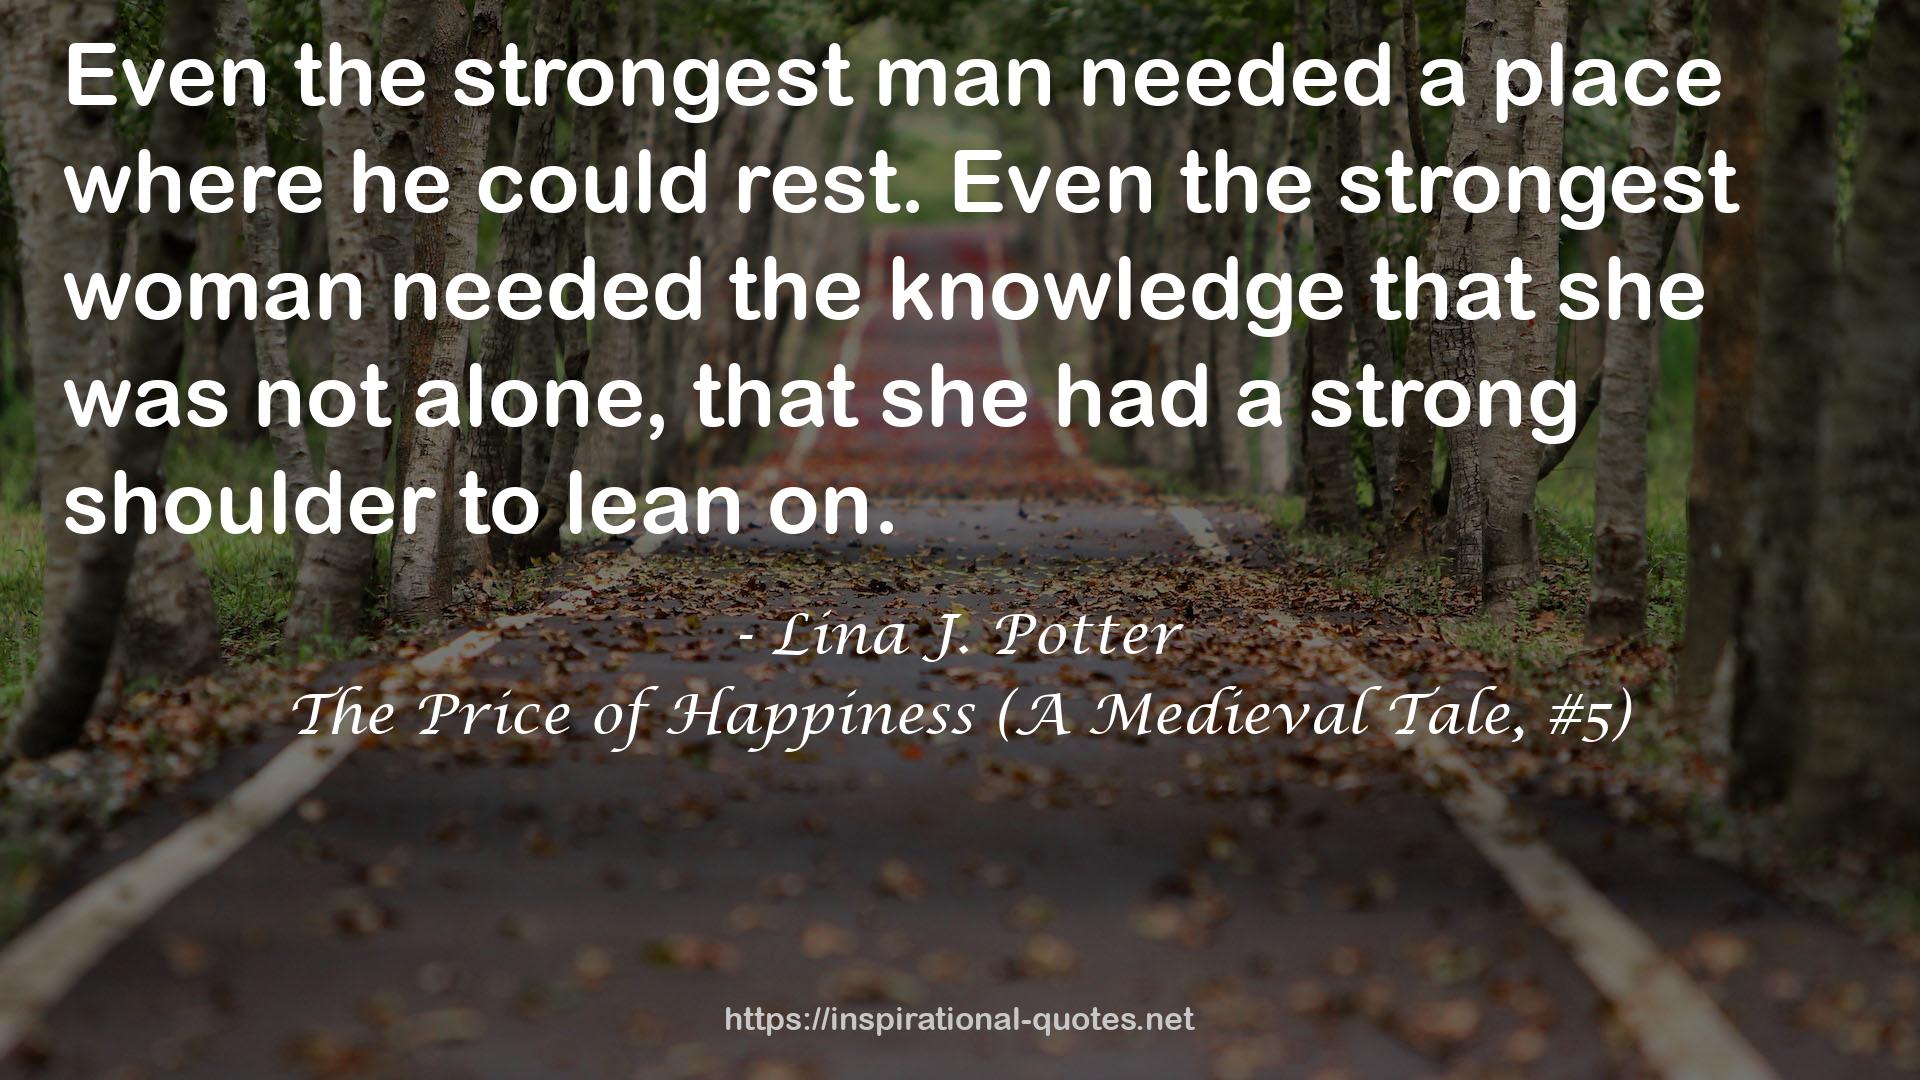 The Price of Happiness (A Medieval Tale, #5) QUOTES